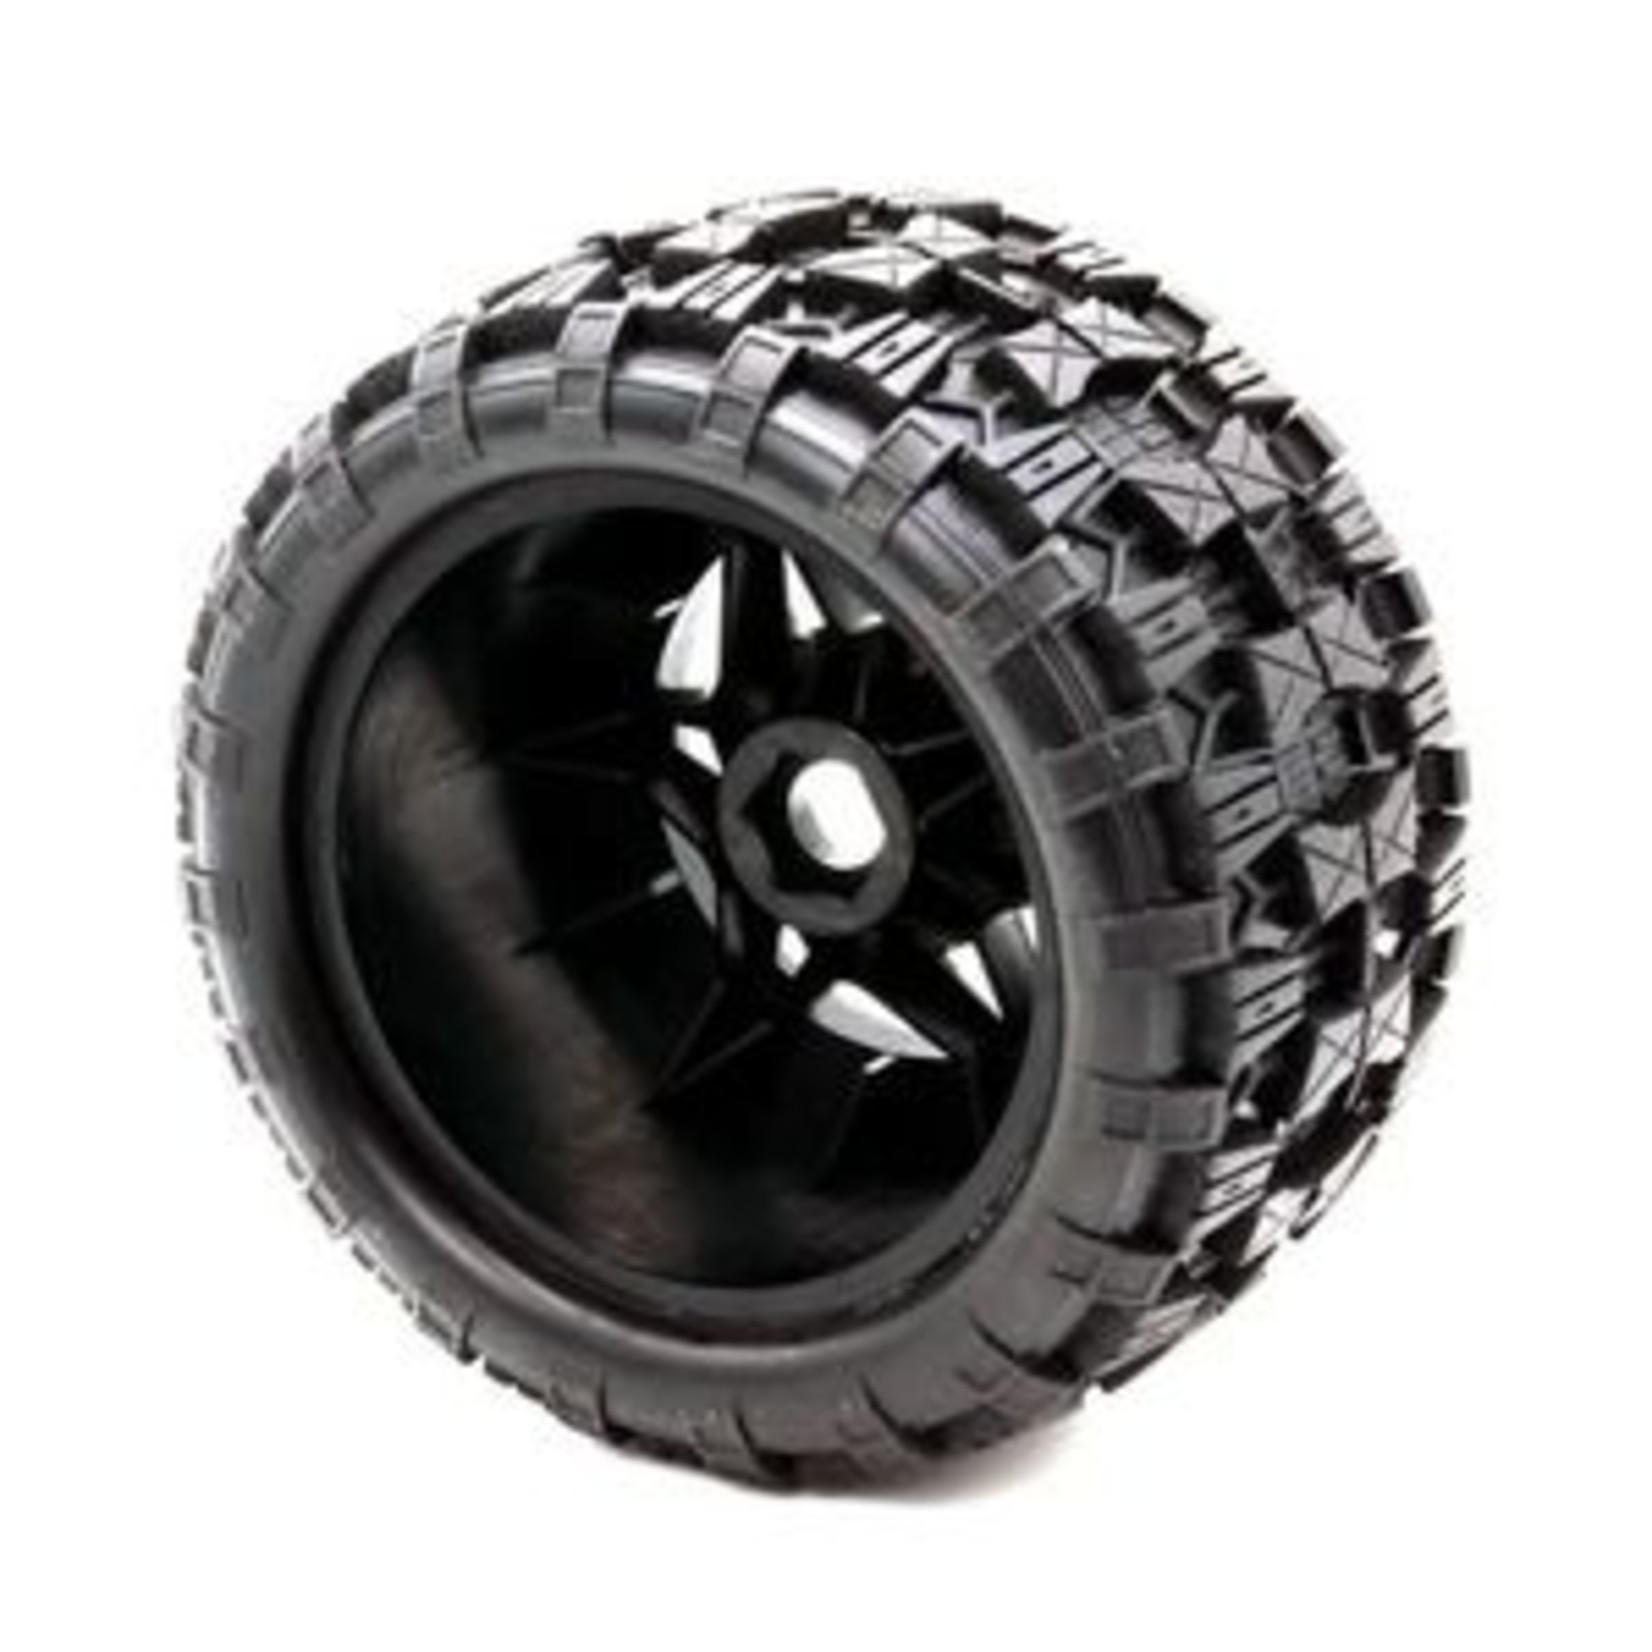 Power Hobby PHBPHT2380 Raptor MX Belted All Terrain Tires Mounted 17mm Traxxas